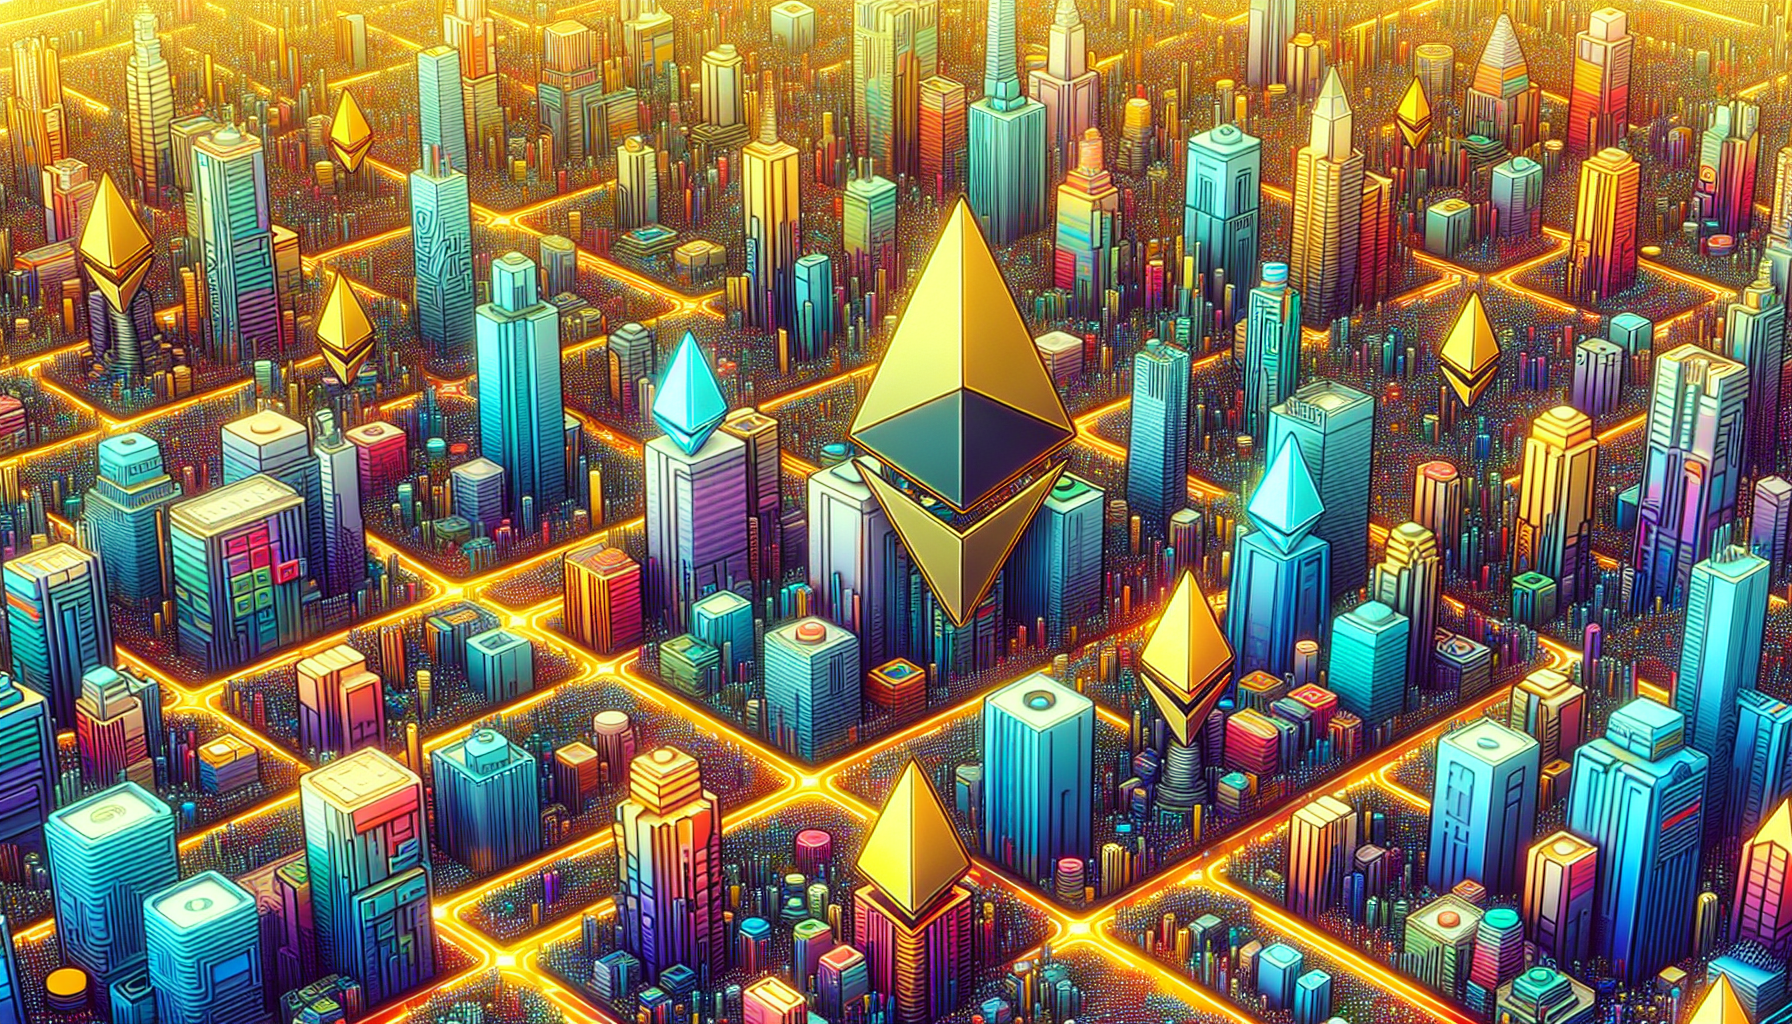 An image of various Ethereum logos spread across a city landscape.